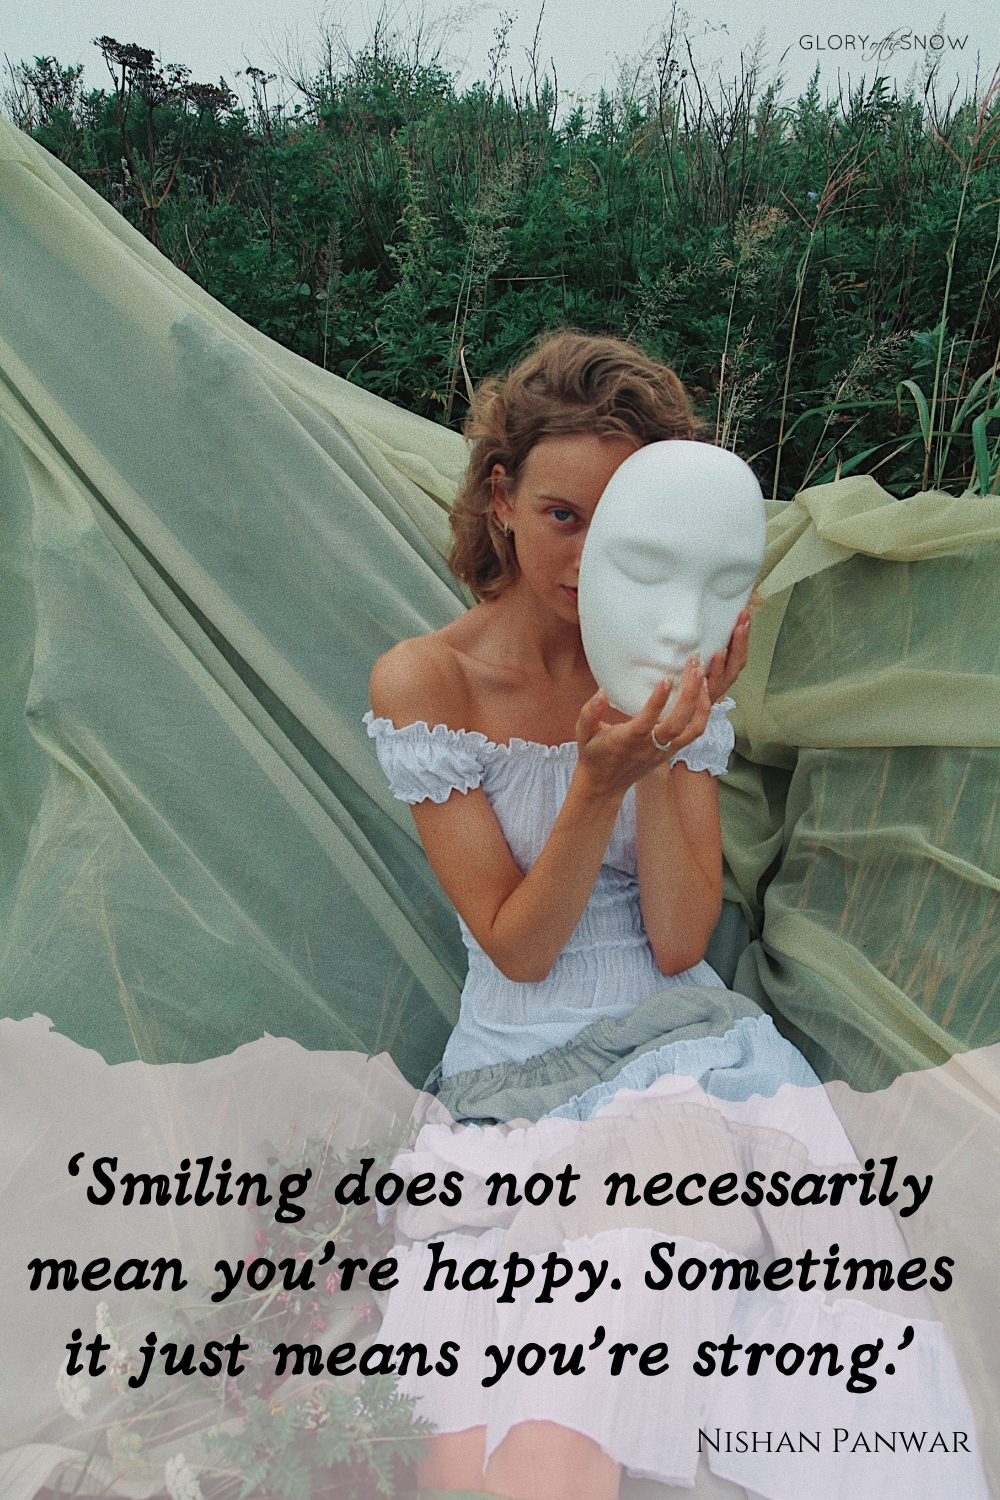 Fake Smile Quotes: The Best Smiling Through Pain Quotes